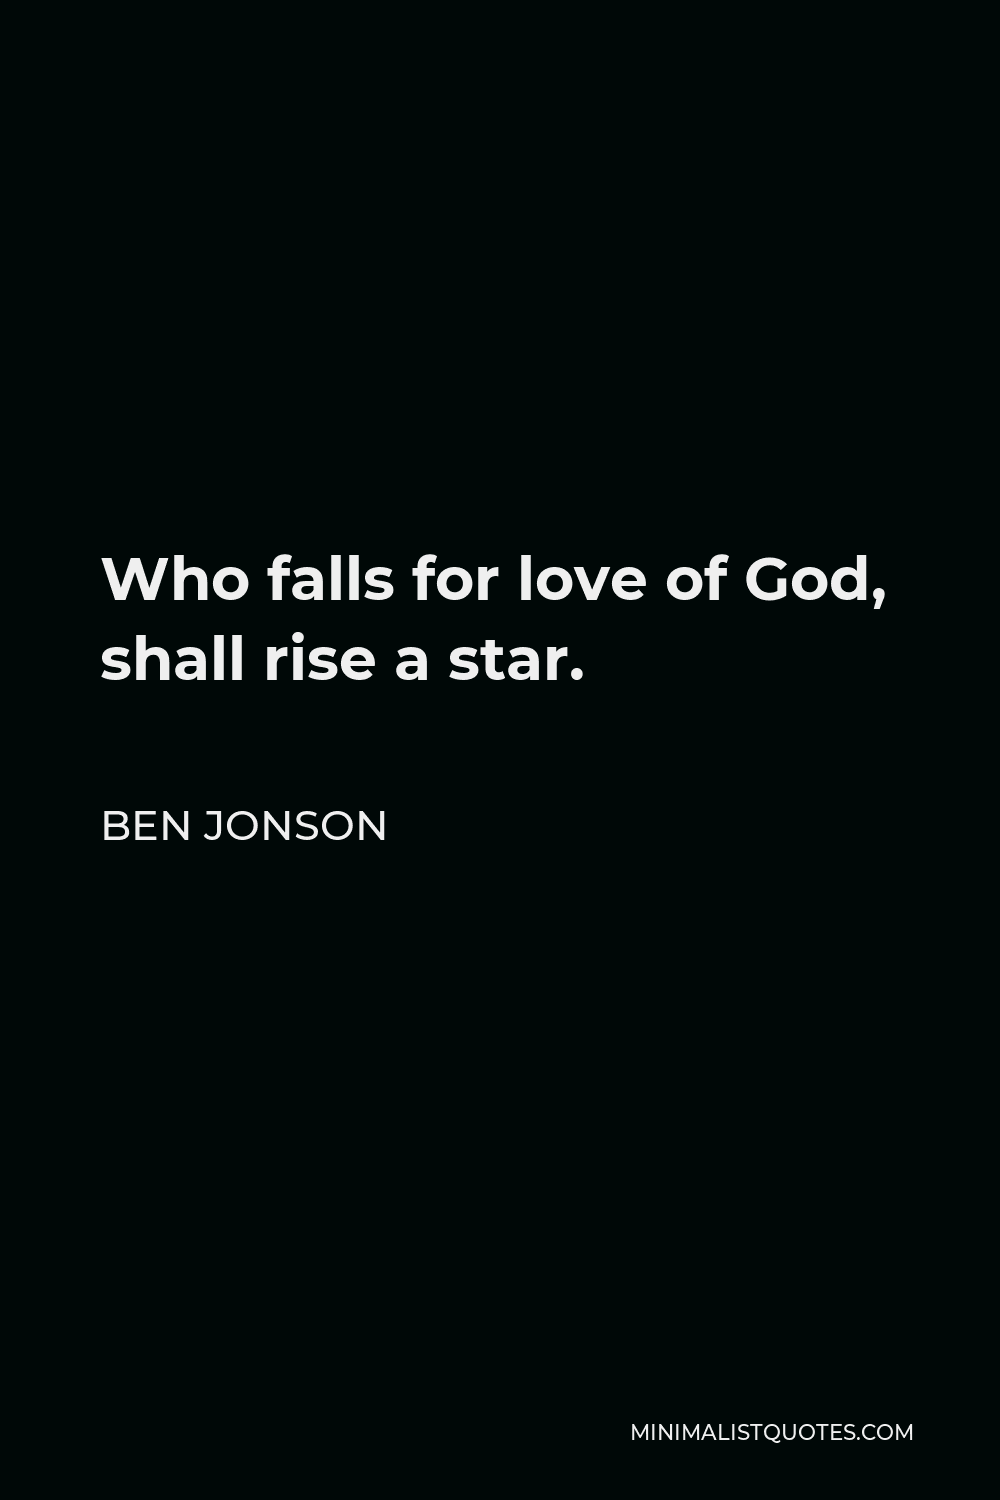 Ben Jonson Quote - Who falls for love of God, shall rise a star.